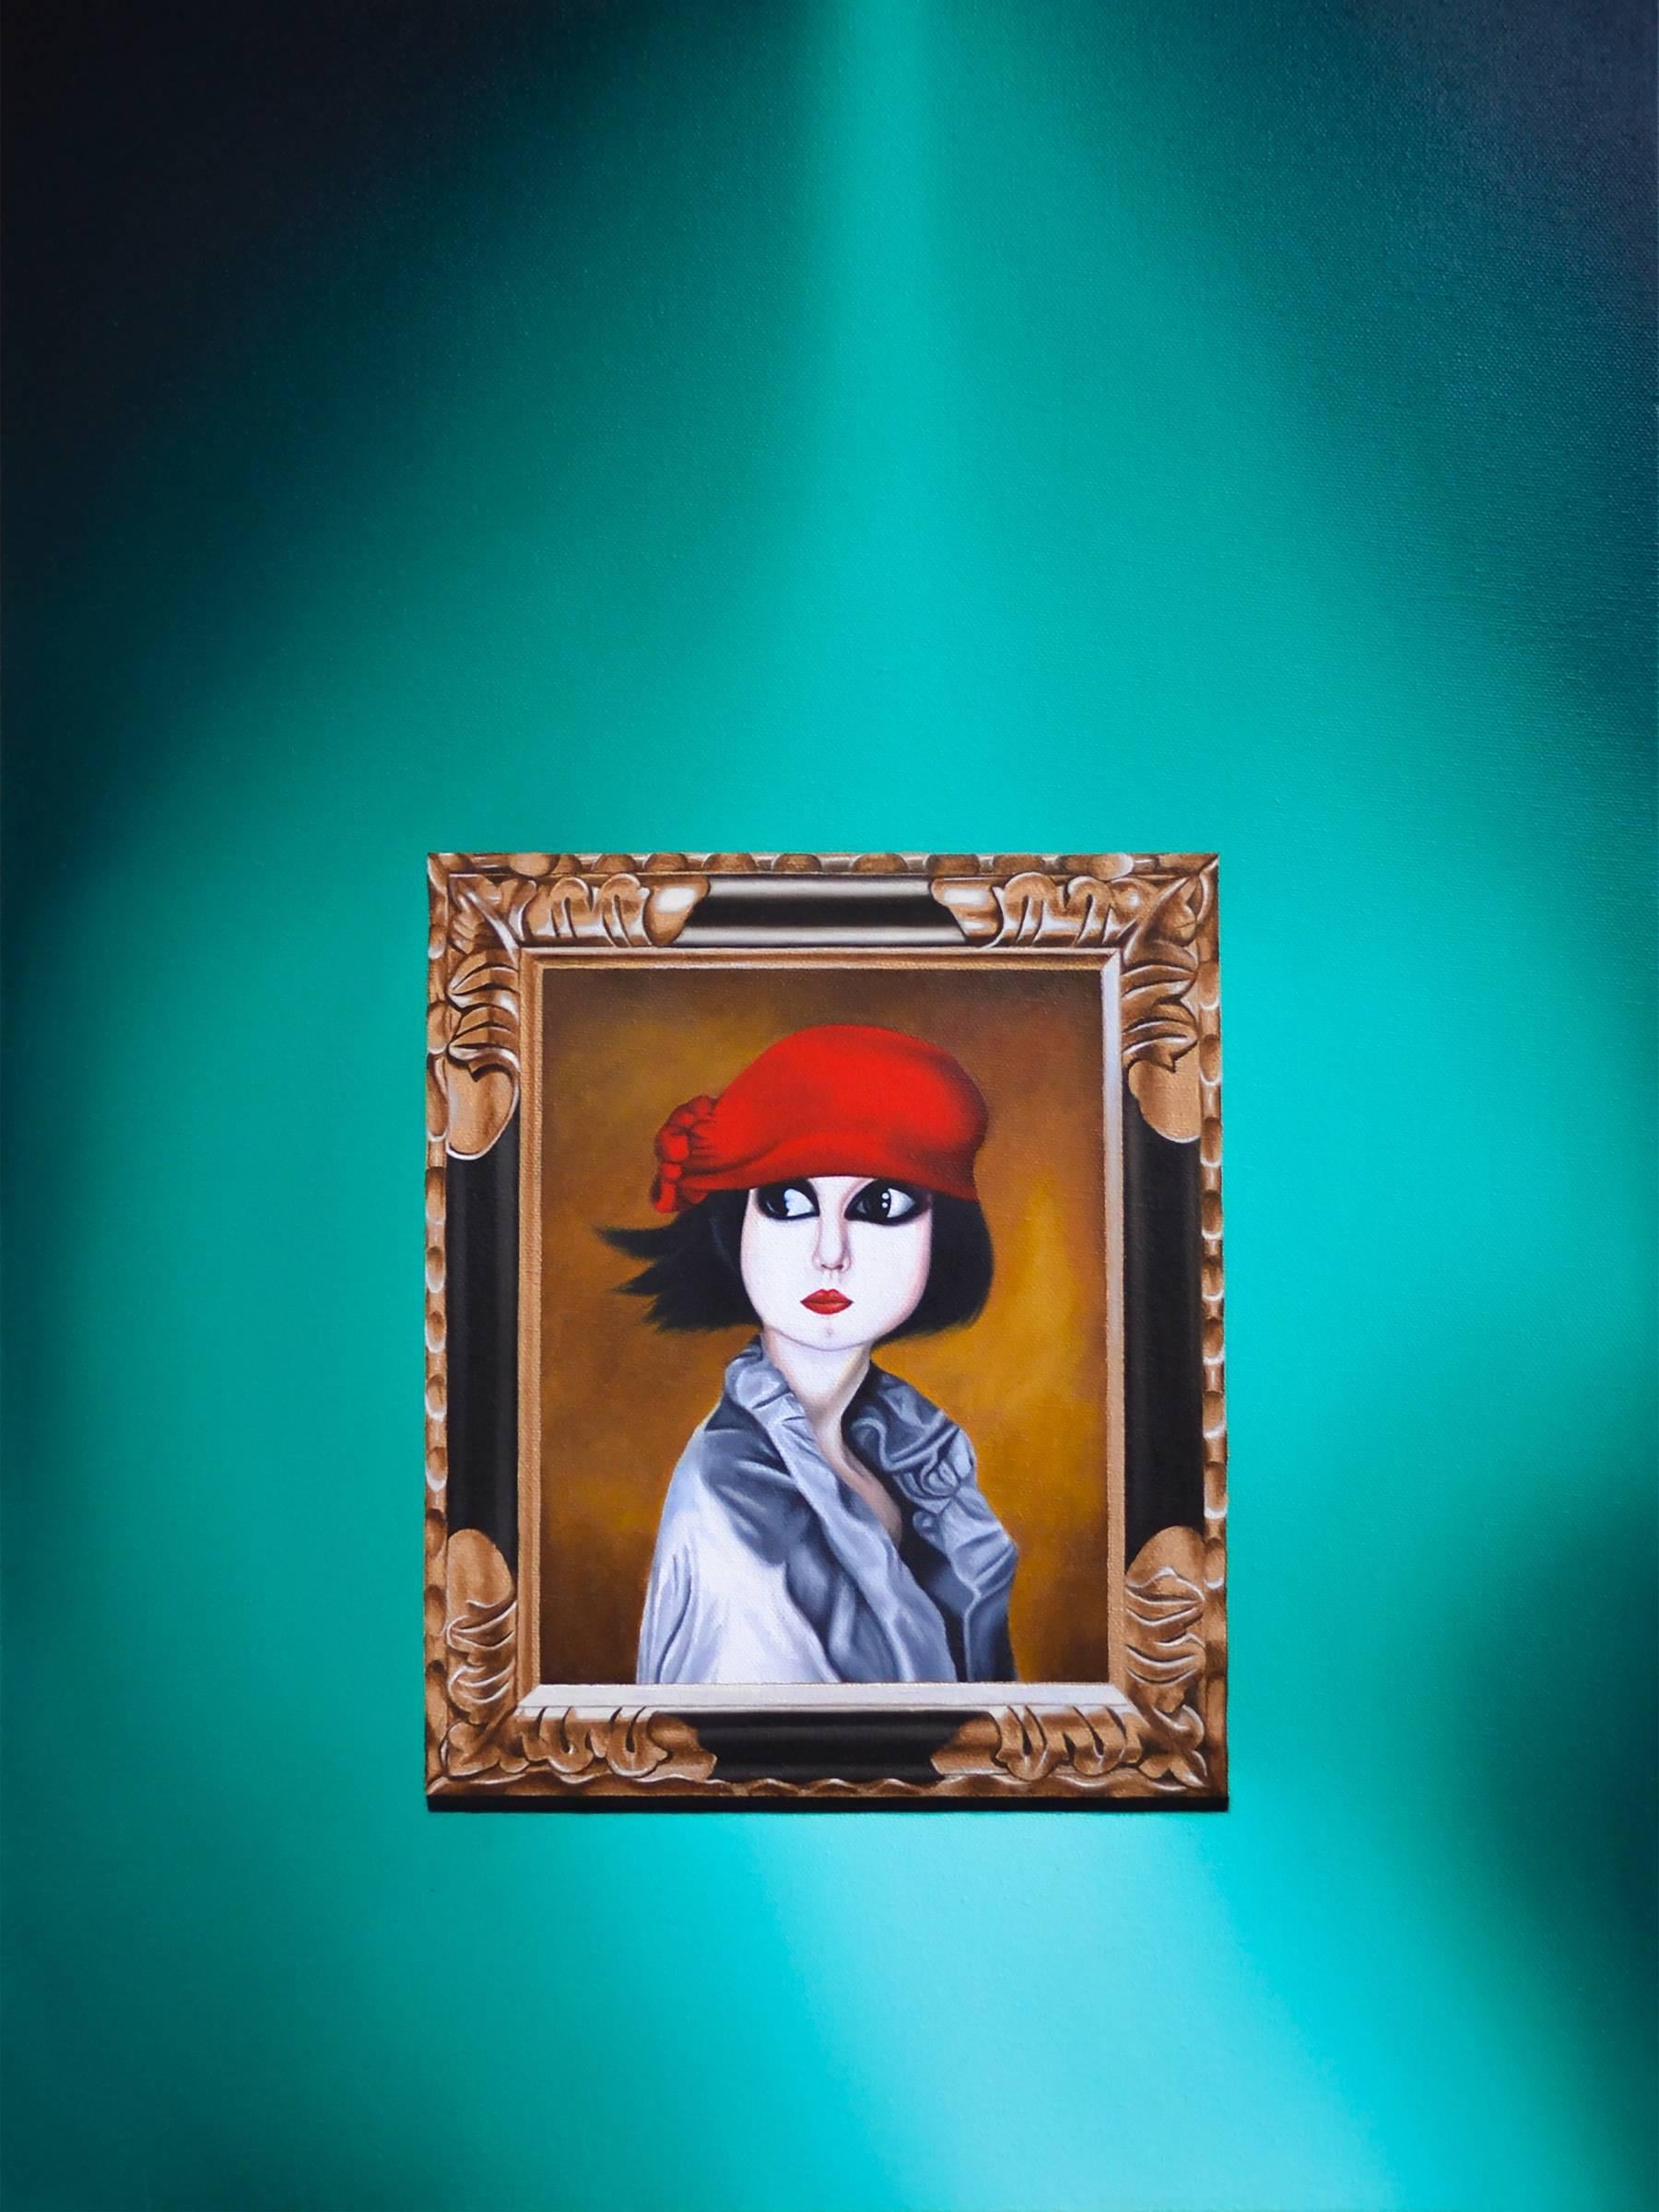 Le Fantasme (after Kees van Dongen) - Painting by Nora See